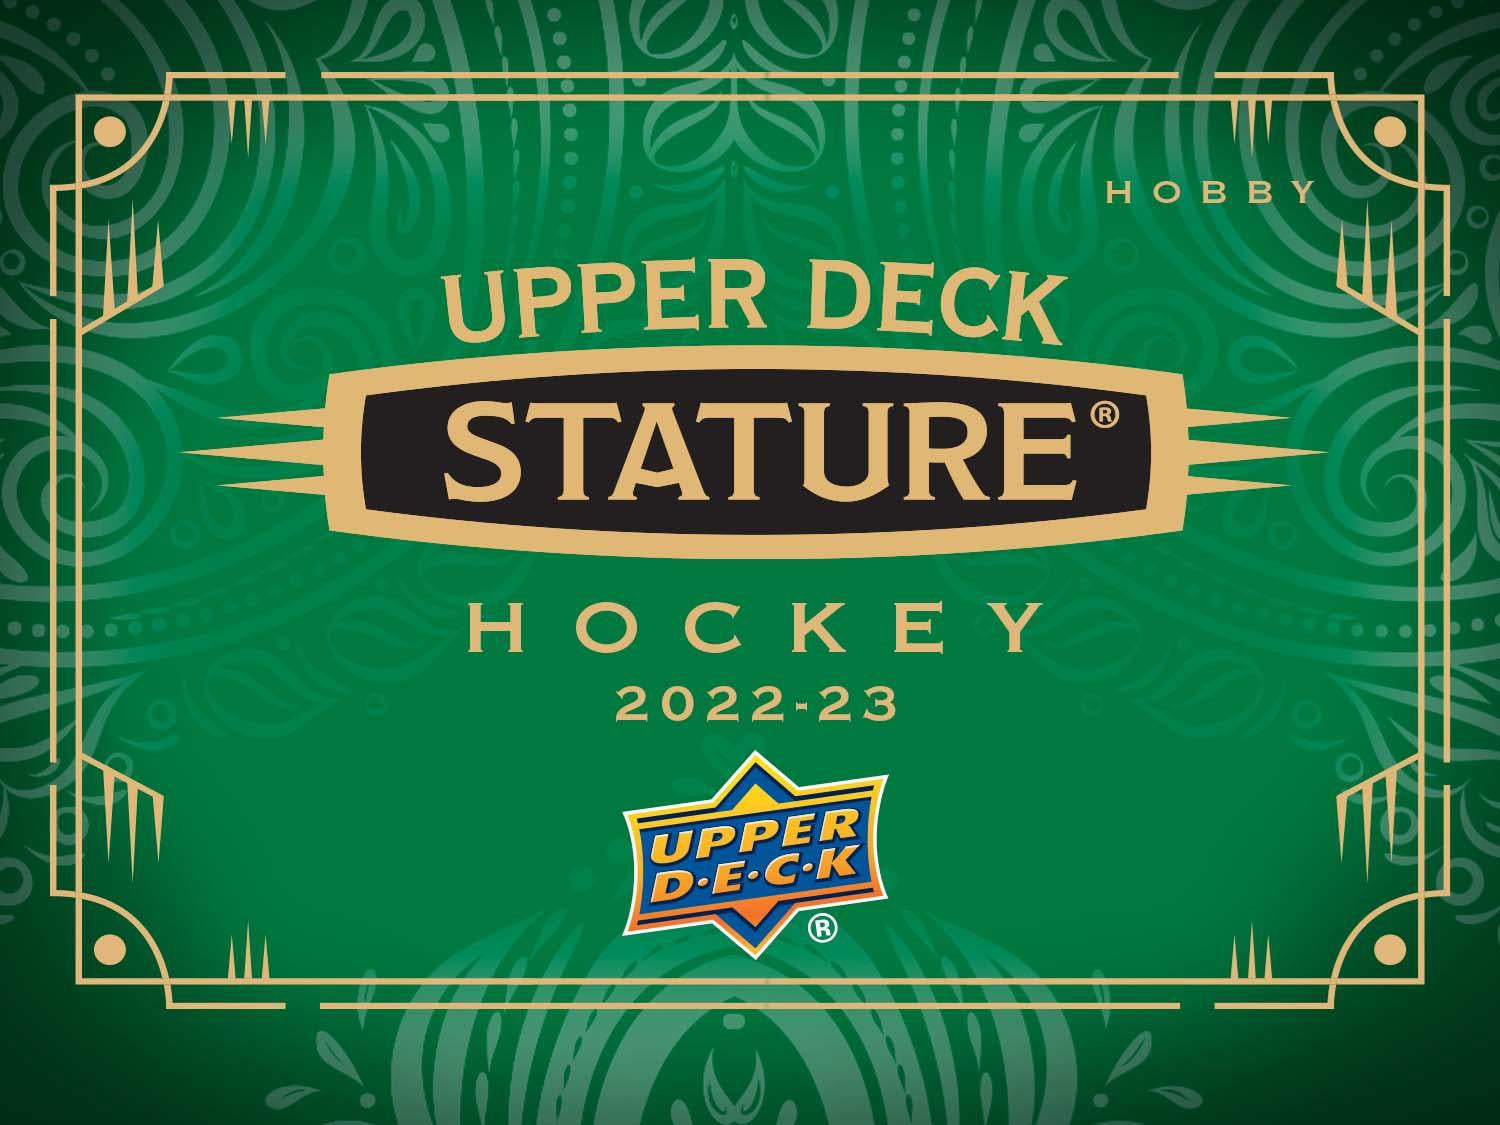 2022-23 Upper Deck Stature Hockey Hobby Box Master Case (Case of 16 Boxes) (Pre-Order) - Miraj Trading